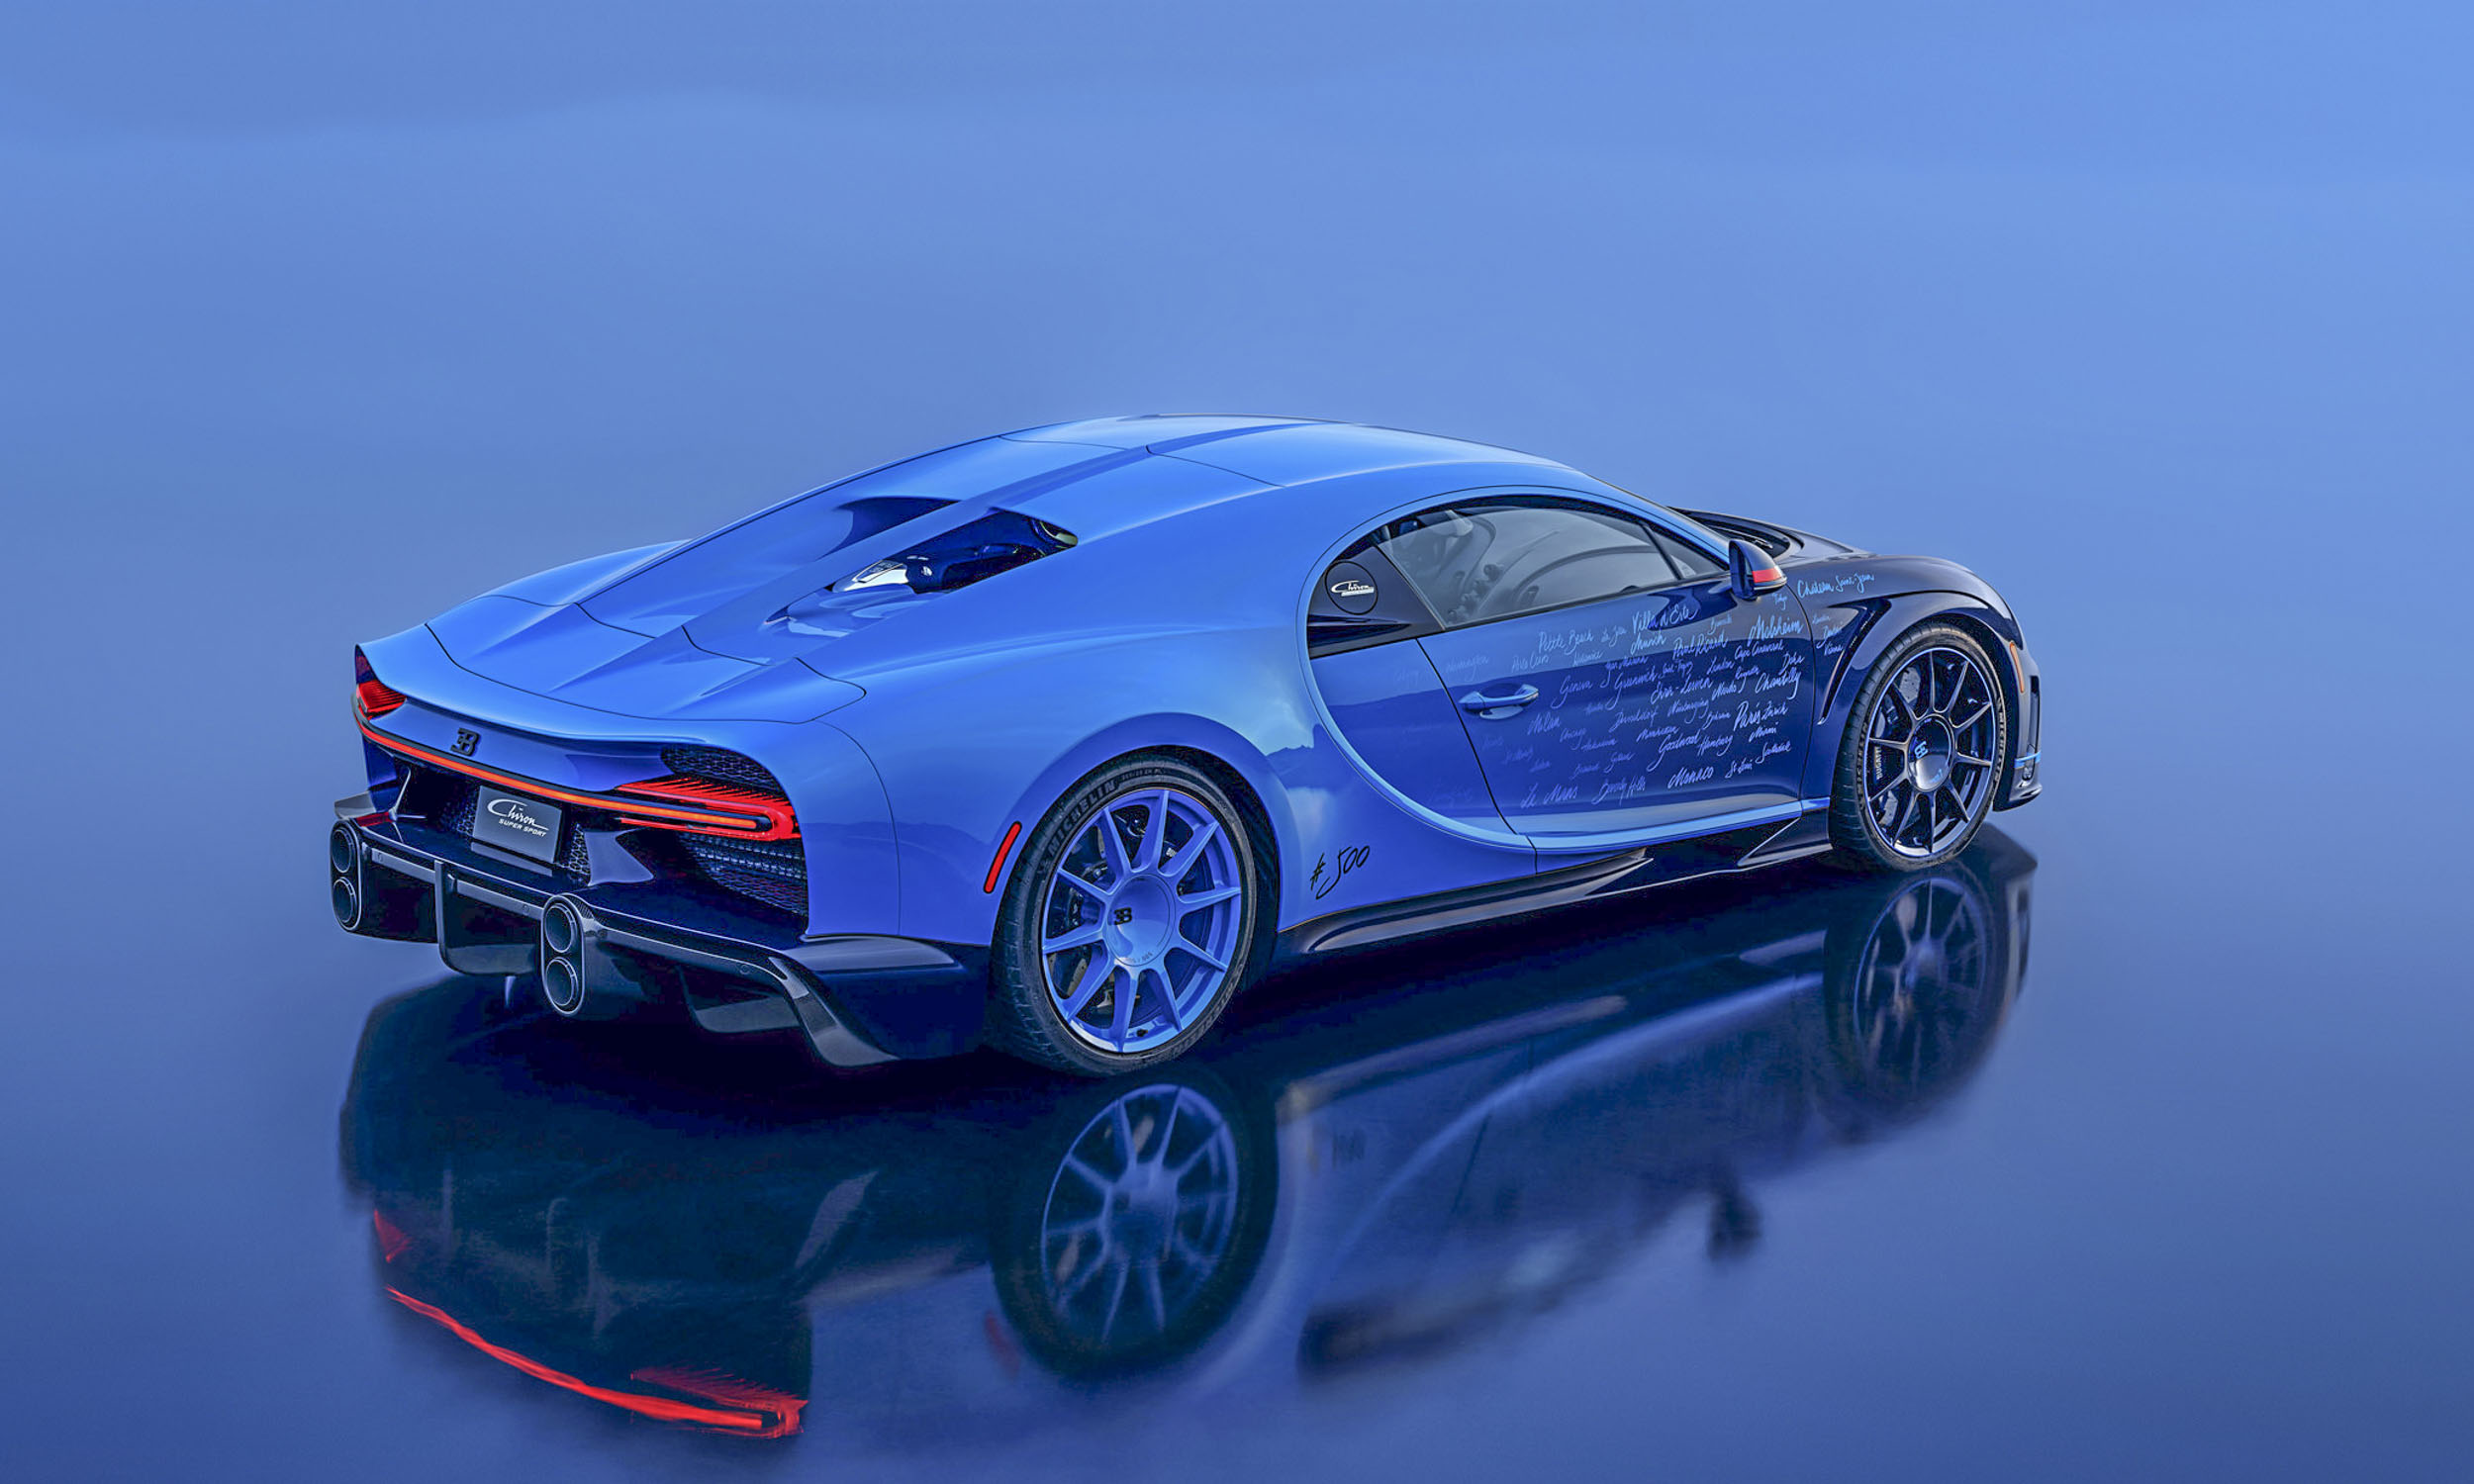 <p>          “With this bespoke work of art, we have retraced the Chiron’s majestic eight-year journey with unforgettable moments that have taken place throughout the world, creating legions of fans for the Chiron, not to mention its countless industry-first breakthroughs and unique world-first achievements,” said Piochon. “This 500th and final Chiron model is a fitting farewell that captures a defining legacy that will forever be etched in automotive history and paves the way to a bright new chapter.”         </p>